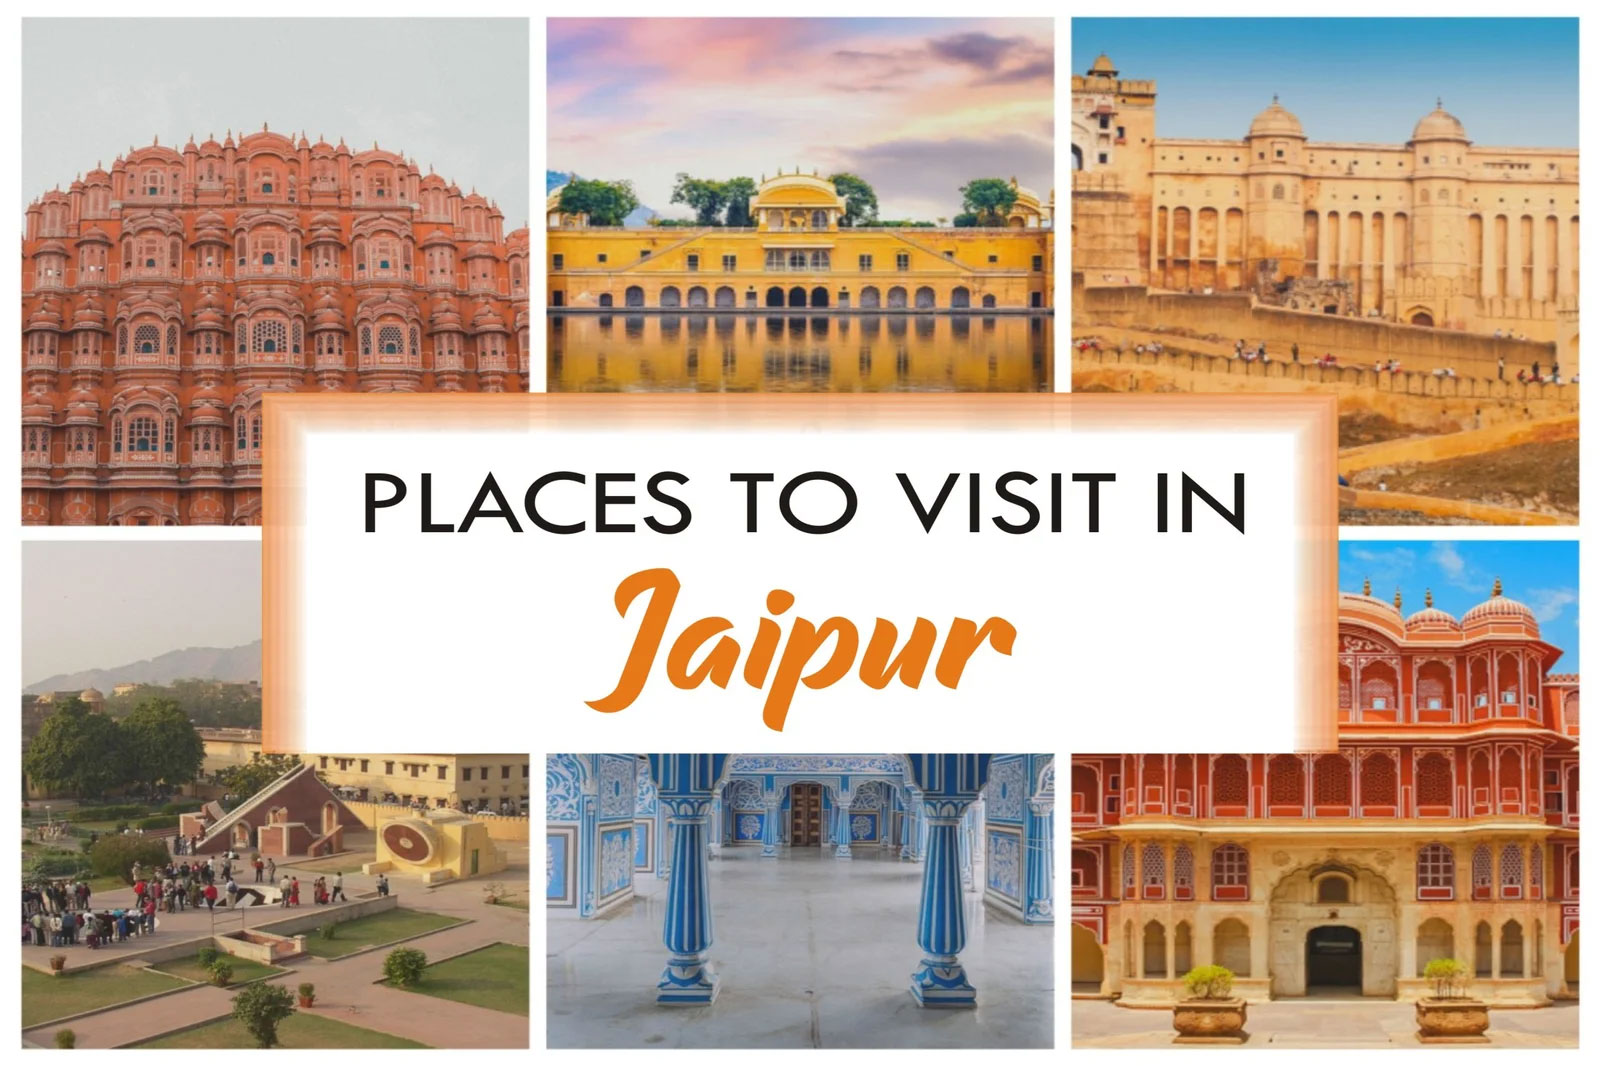 The travel guide for exploring the top local and outstation places to visit in Jaipur